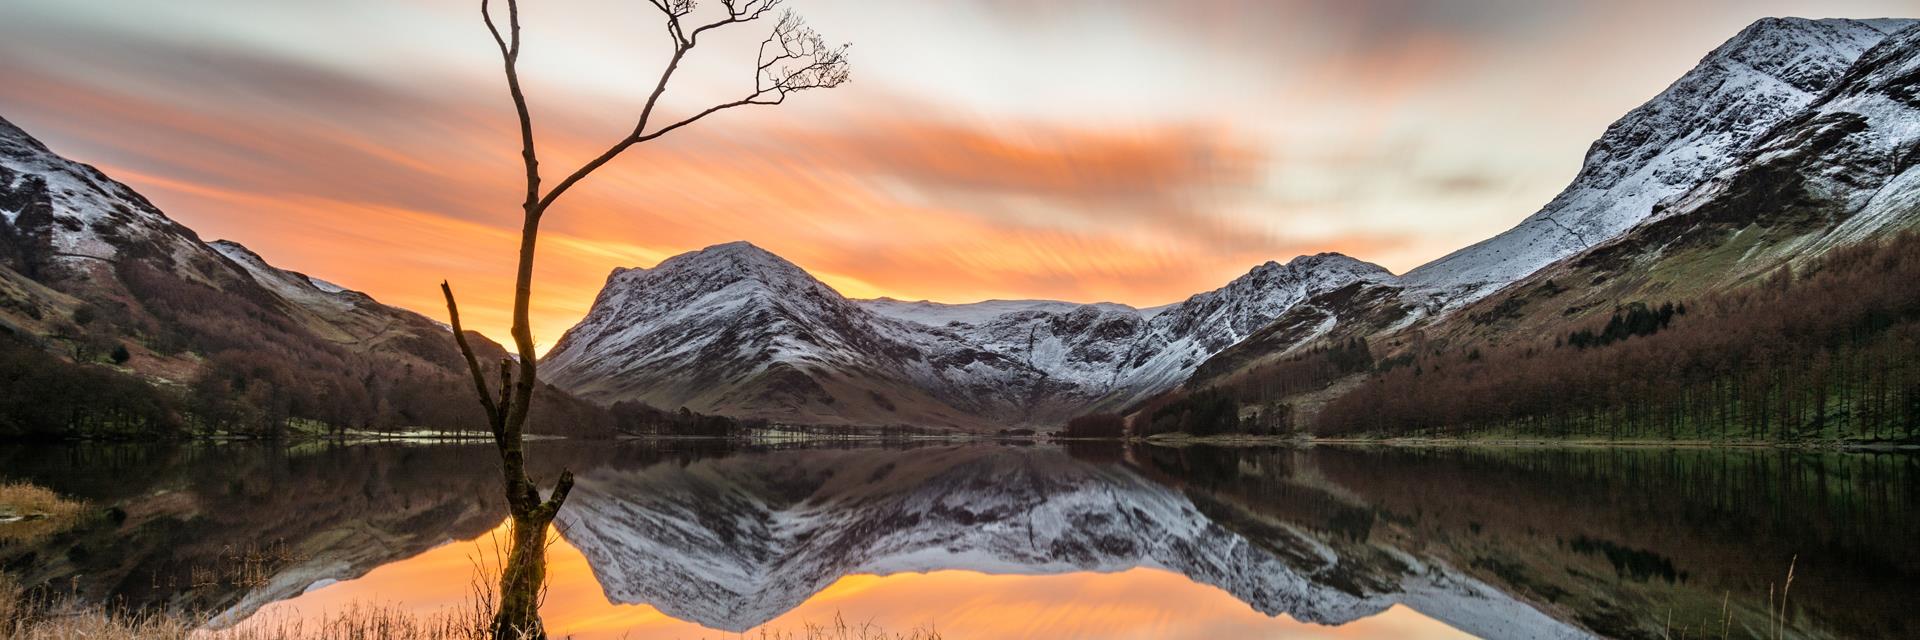 Vibrant sunrise with snowcapped mountains reflecting in calm still water at Buttermere, Lake District, UK